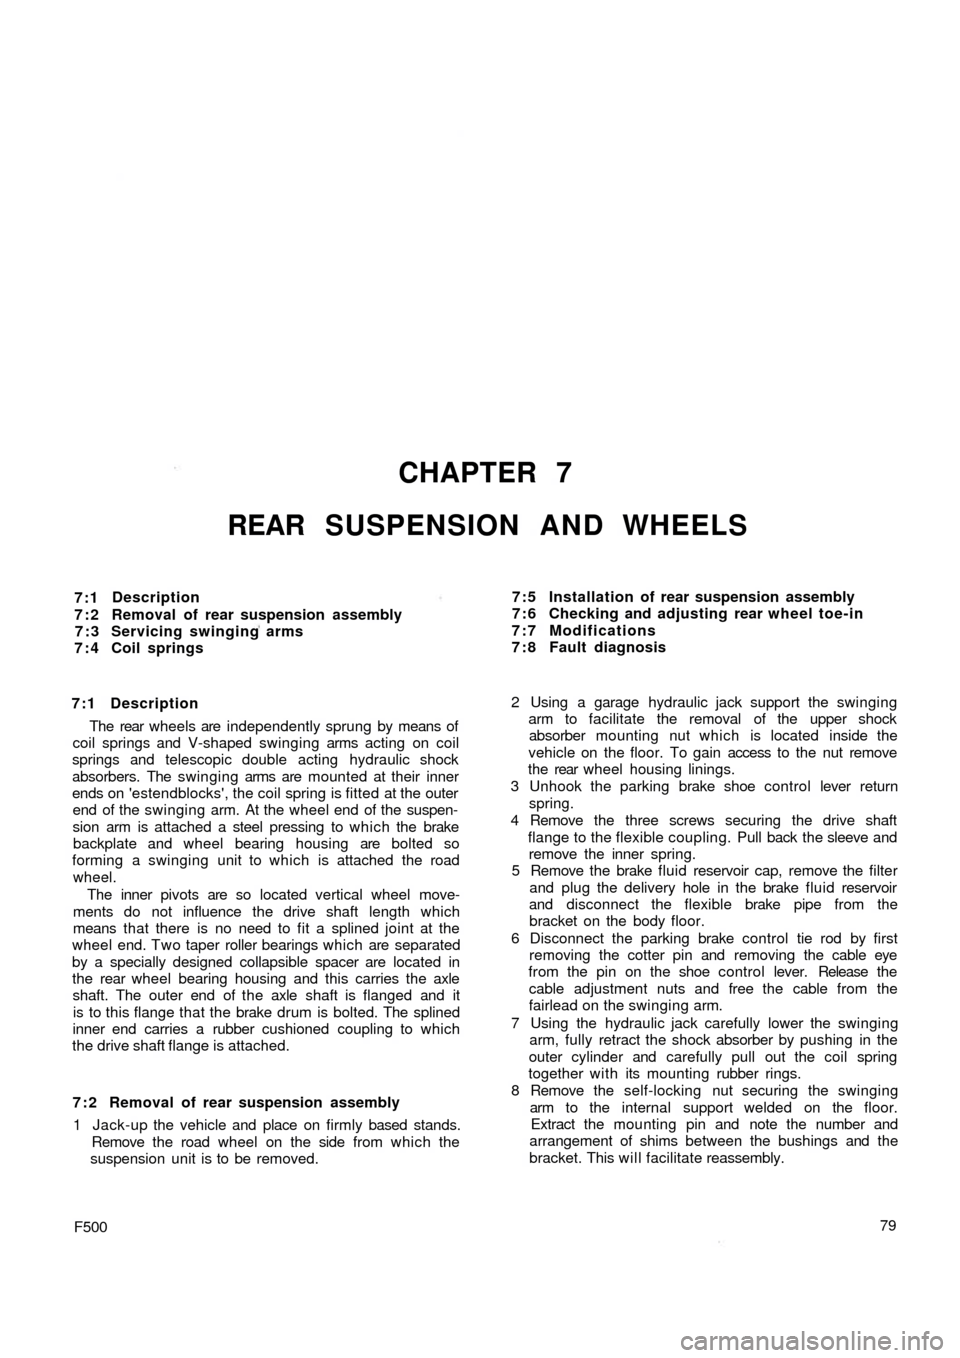 FIAT 500 1958 1.G Workshop Manual CHAPTER 7
REAR SUSPENSION AND WHEELS
7:1
7:2
7:3
7:4Description
Removal of rear suspension assembly
Servicing swinging arms
Coil springs
7:1 Description
The  rear  wheels are independently sprung by m